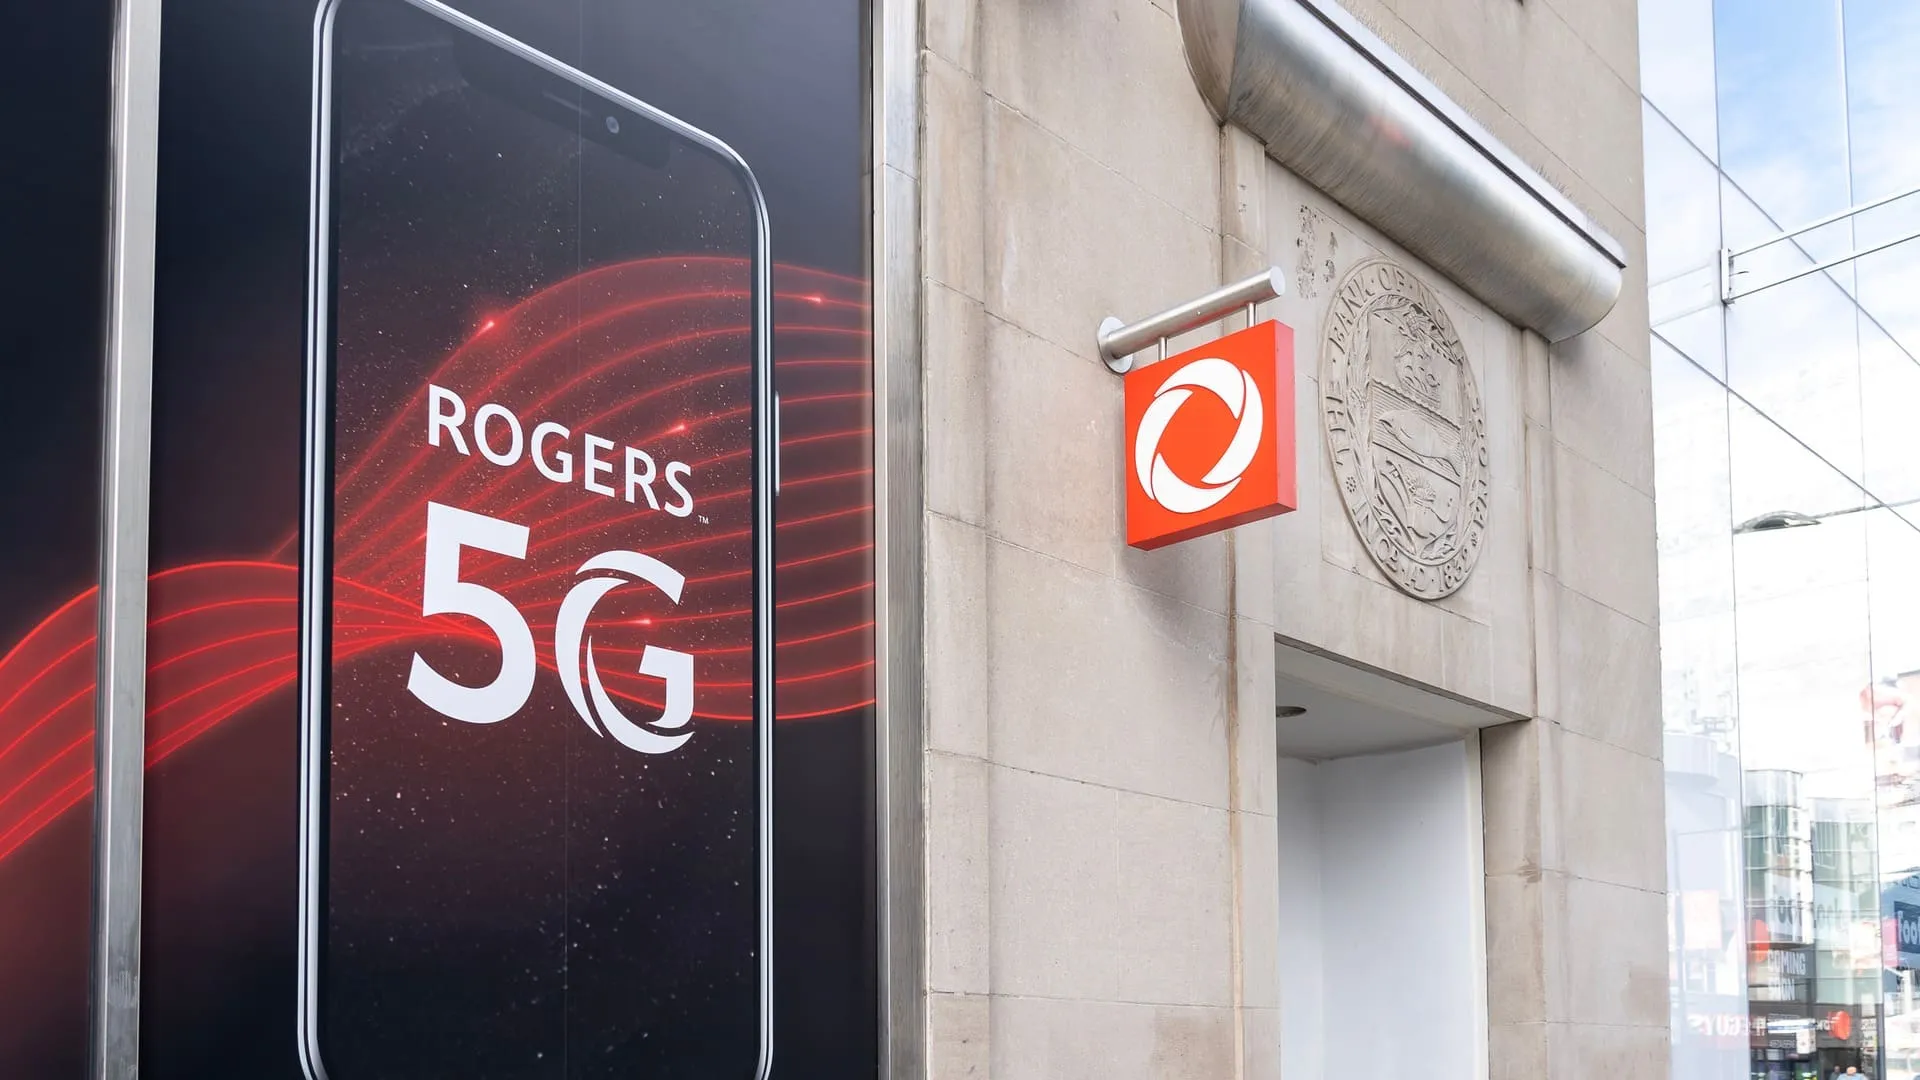 Canadians Are Reliant on Rogers Whether We Like It or Not